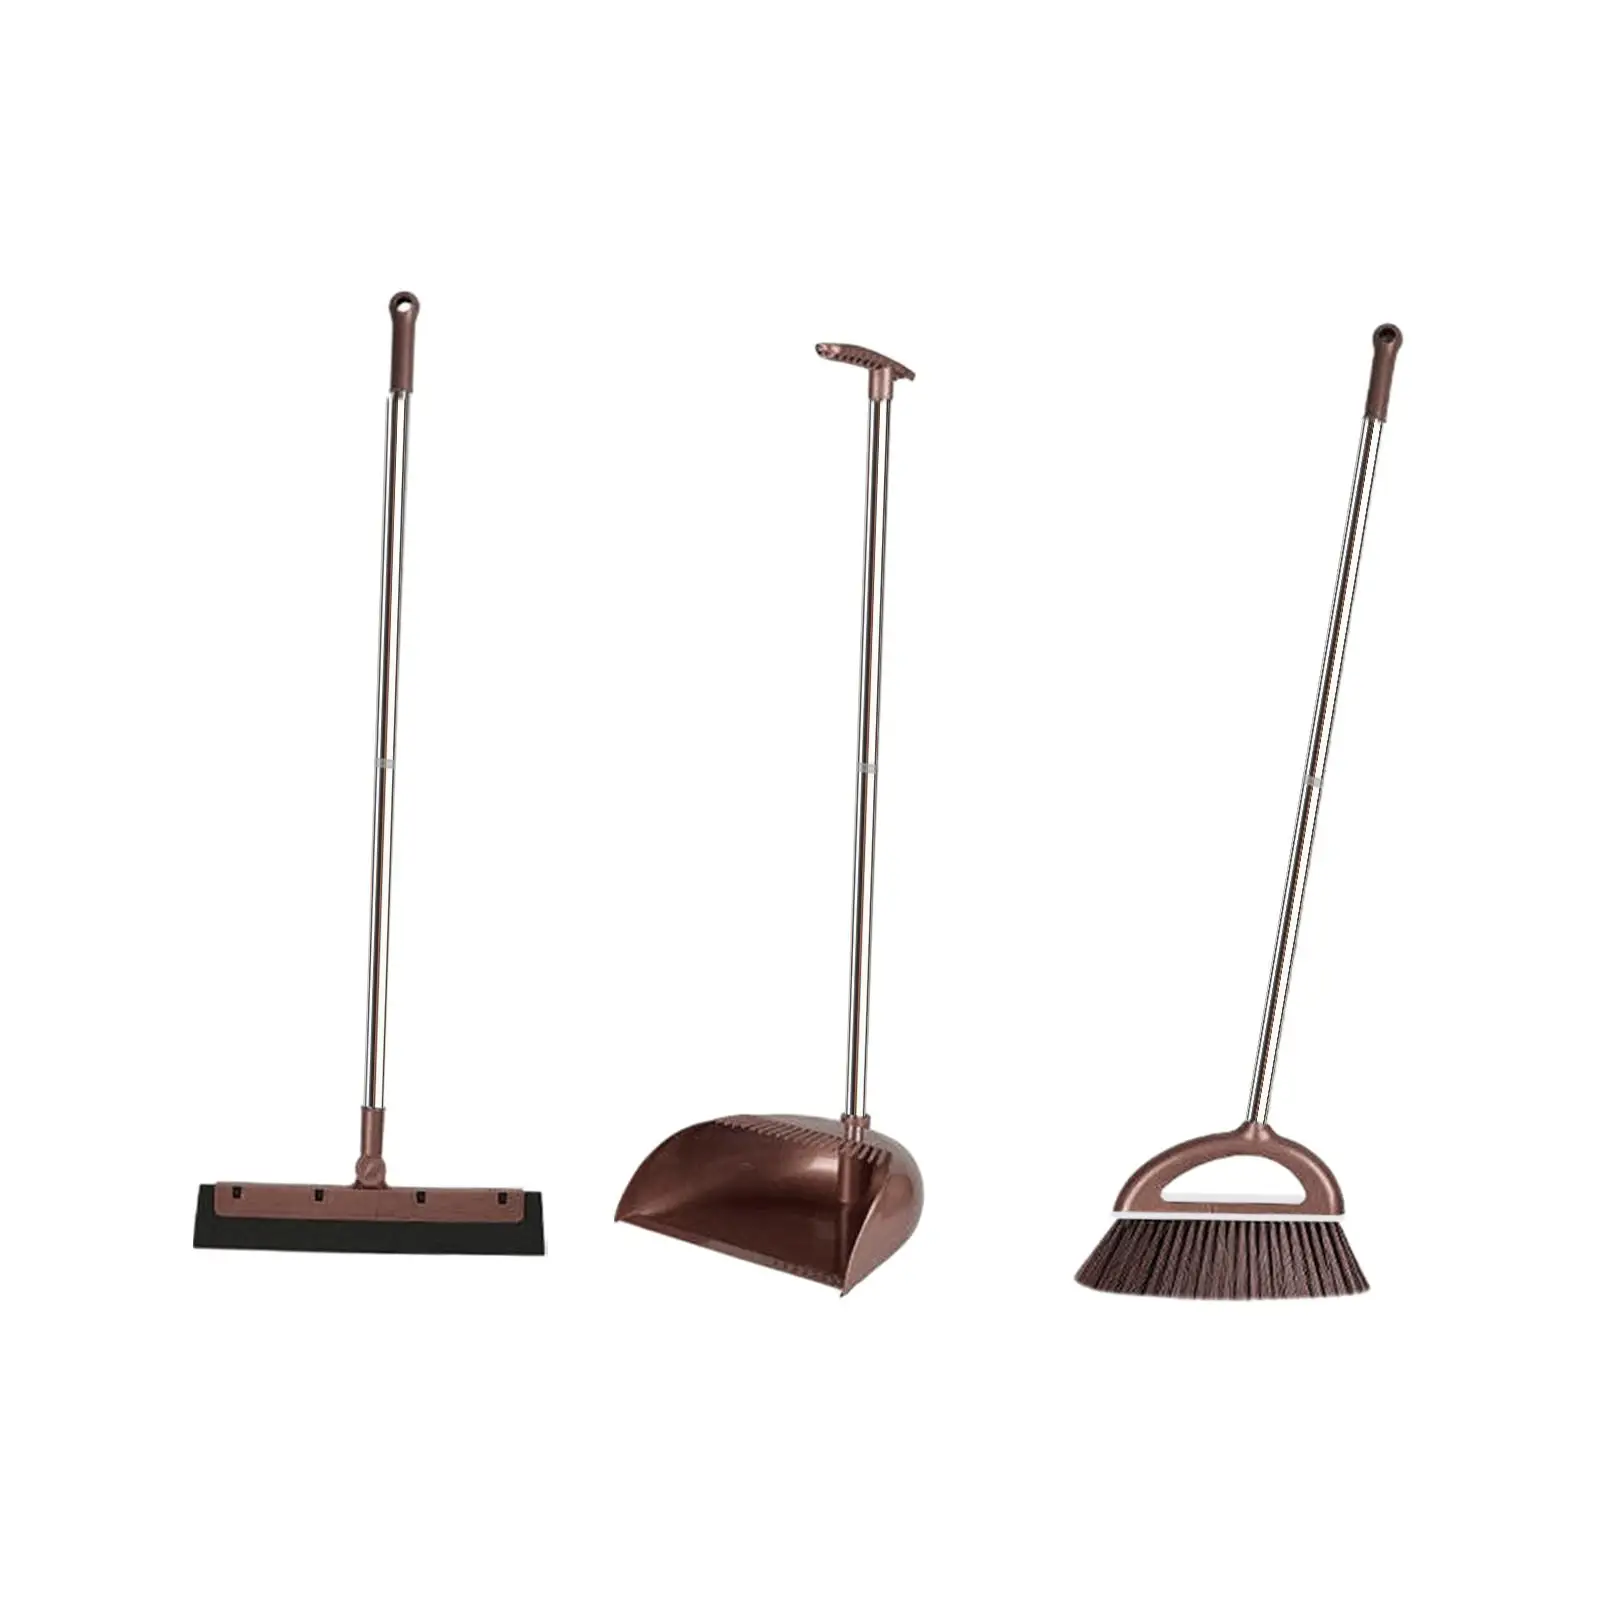 3 Pieces Dustpan Broom Set Floor Wiper Hair Sweeping Long Handle Cleaning Set for Office Outdoor Kitchen Household Cleaning